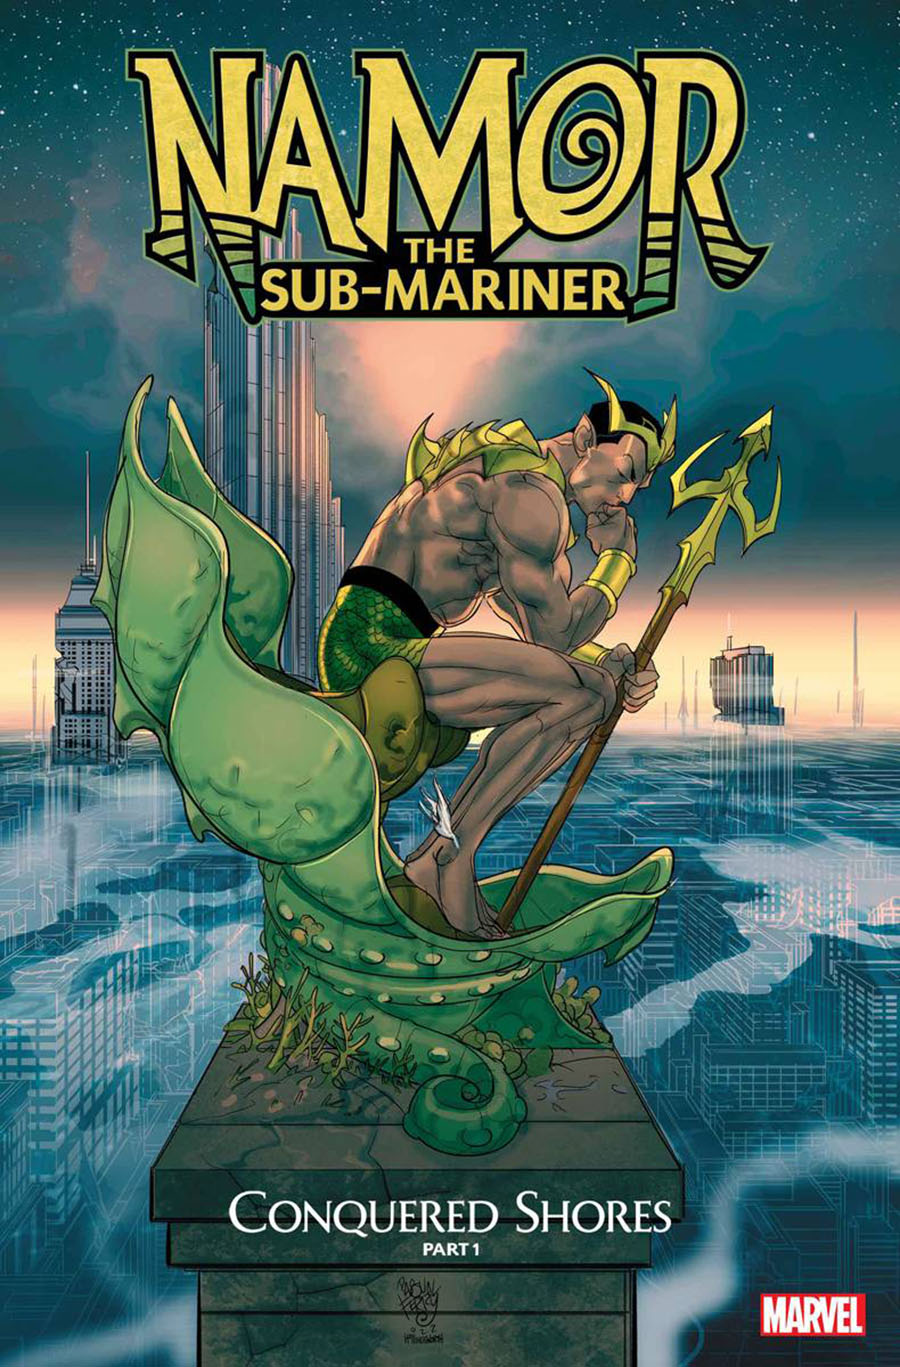 Namor The Sub-Mariner Conquered Shores #1 Cover A Regular Pasqual Ferry Cover